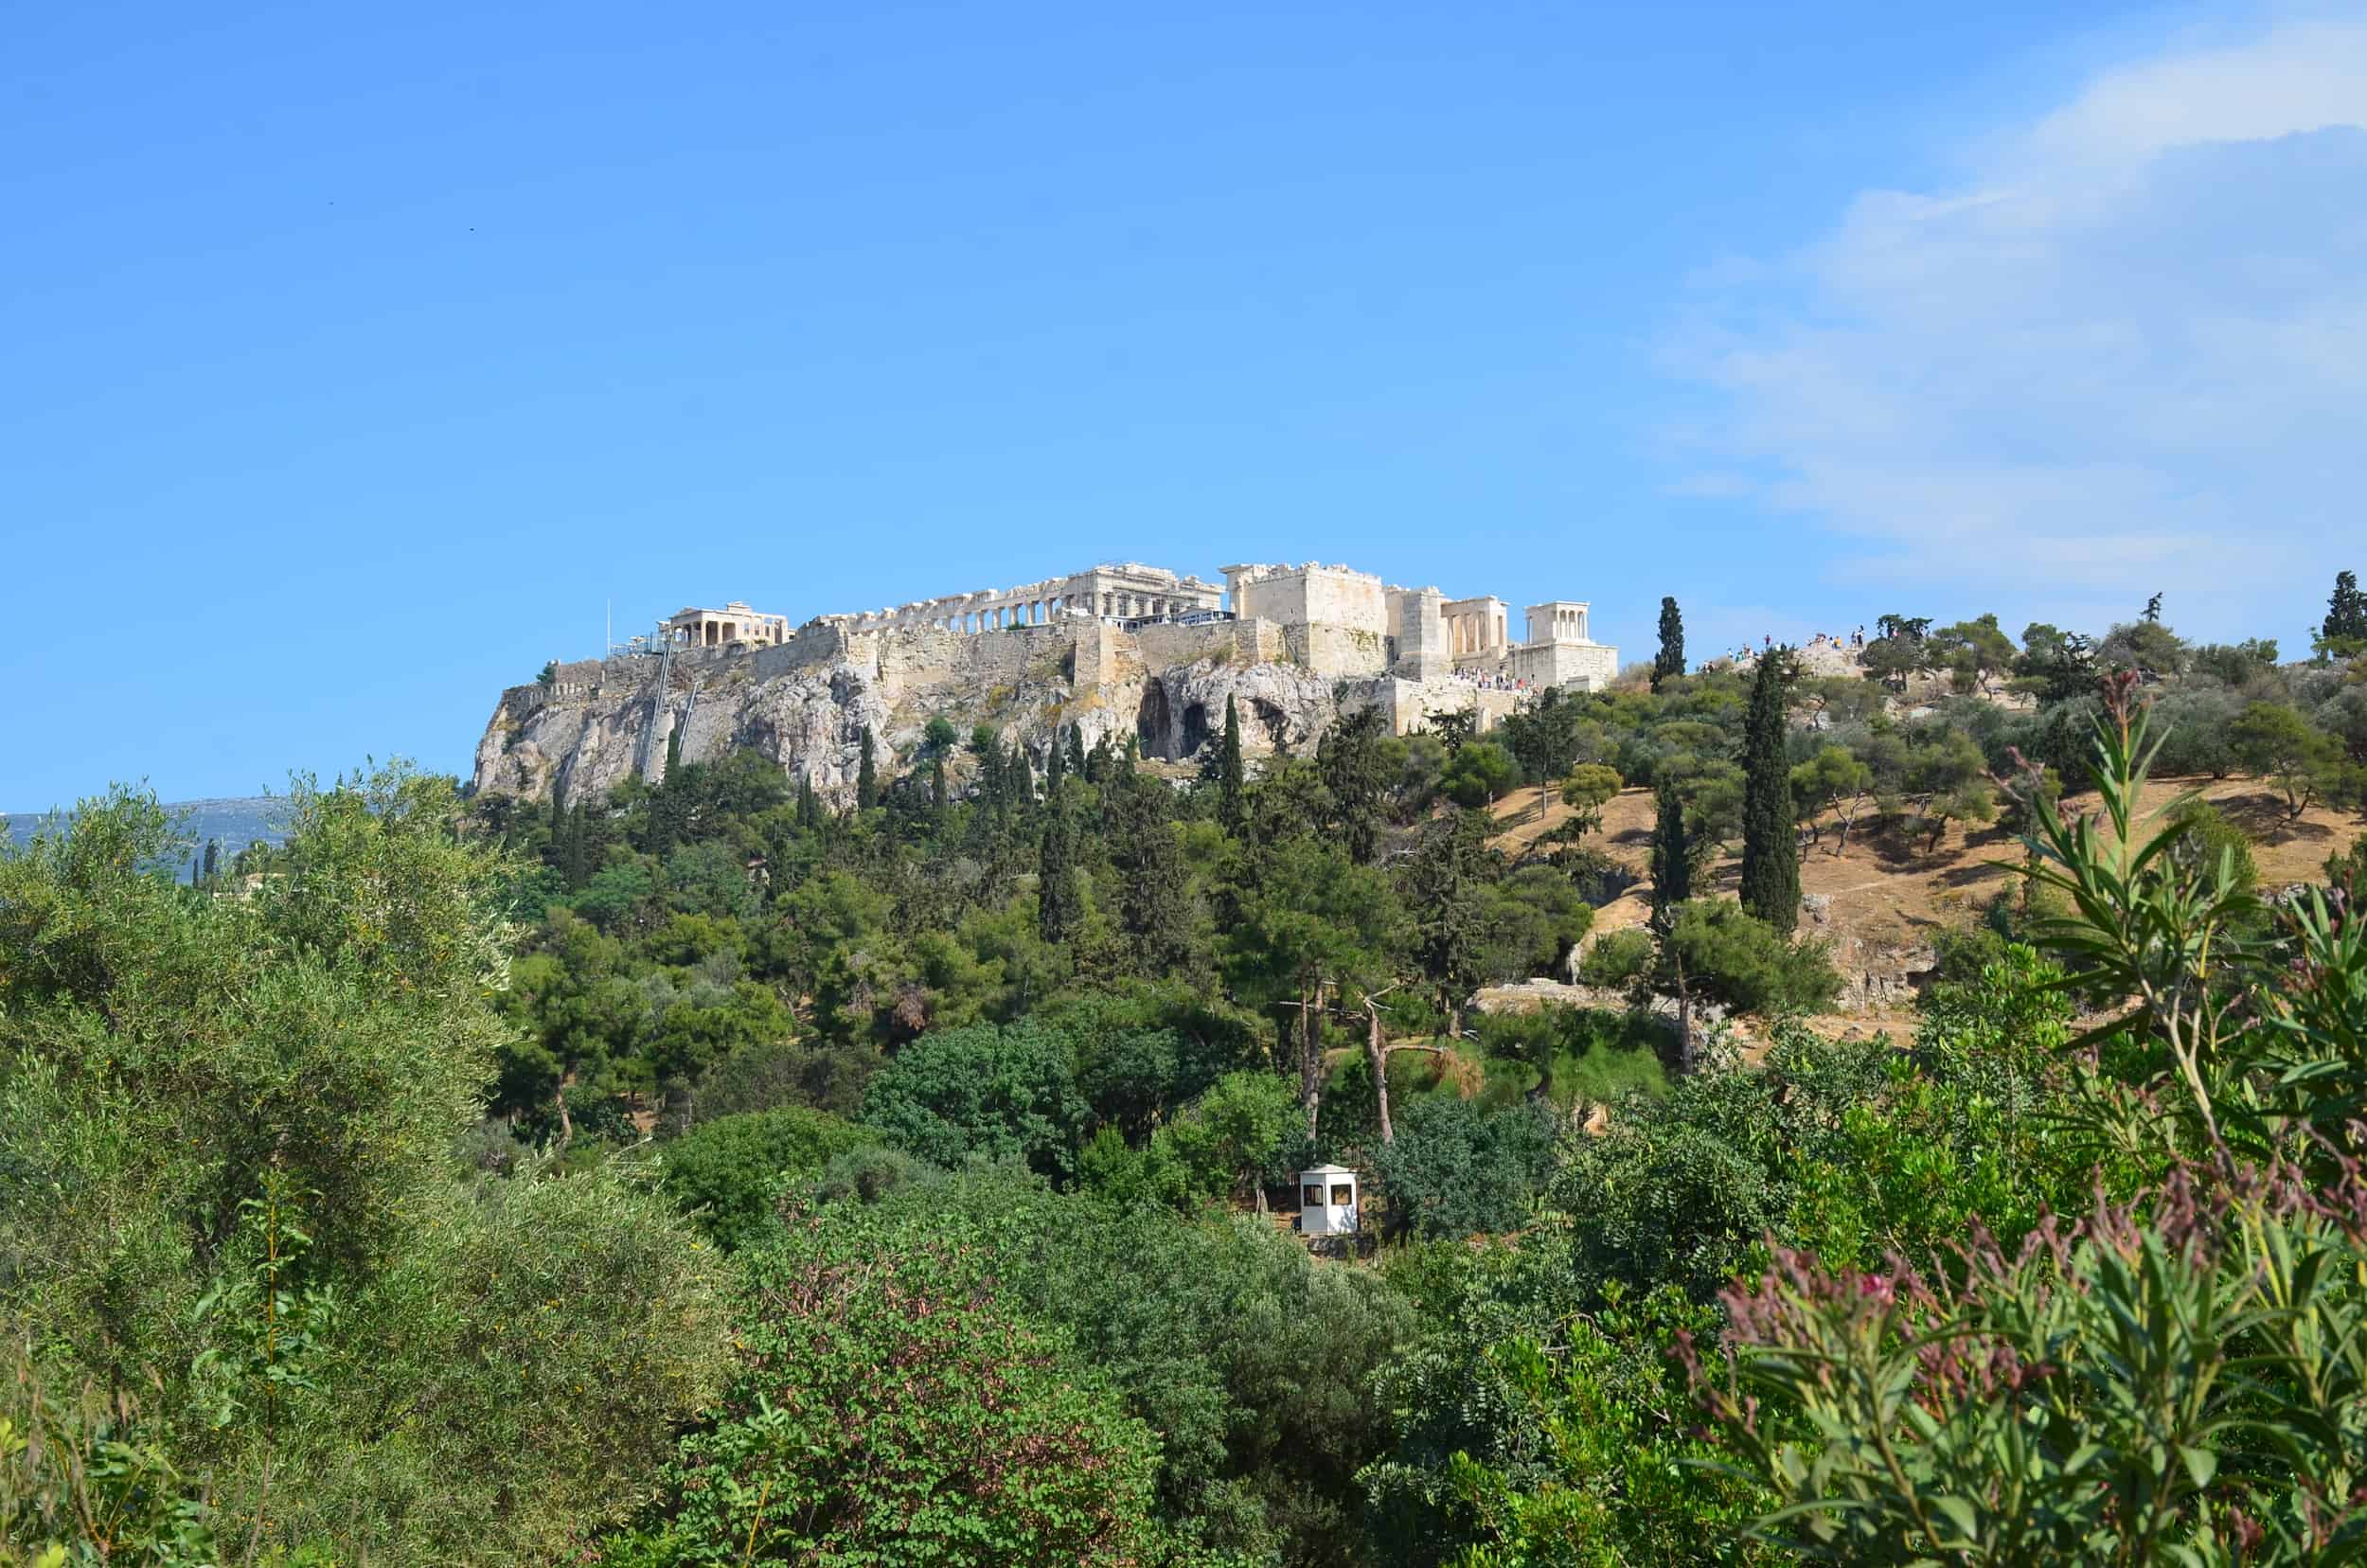 View of the Acropolis from Jacqueline de Romilly Square in Thiseio, Athens, Greece